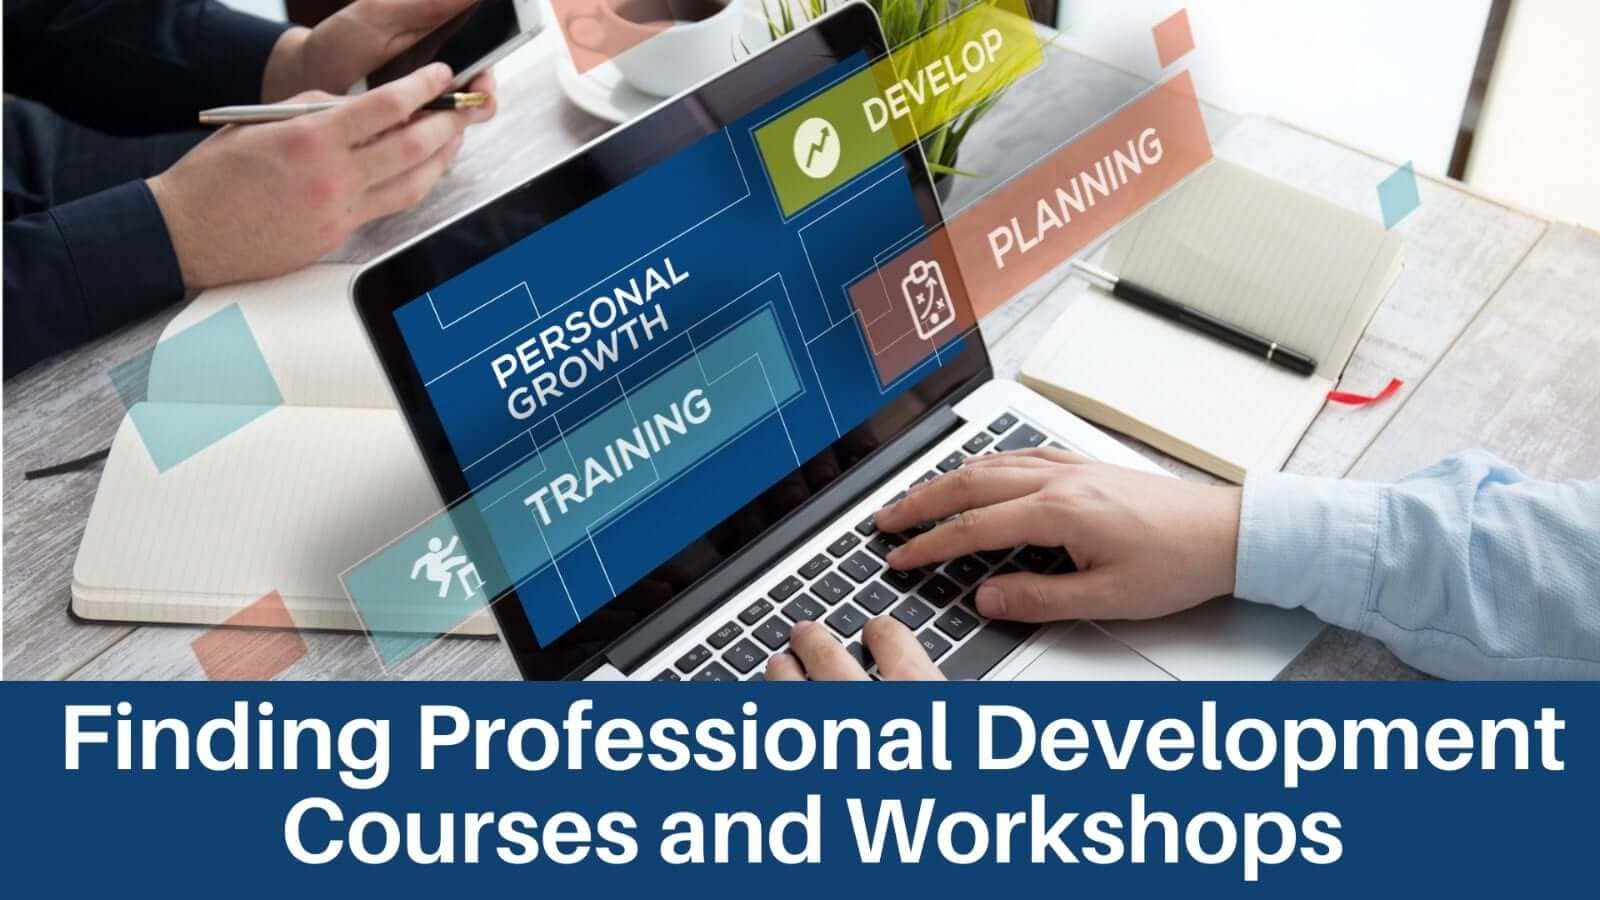 Finding Professional Development Courses and Workshops